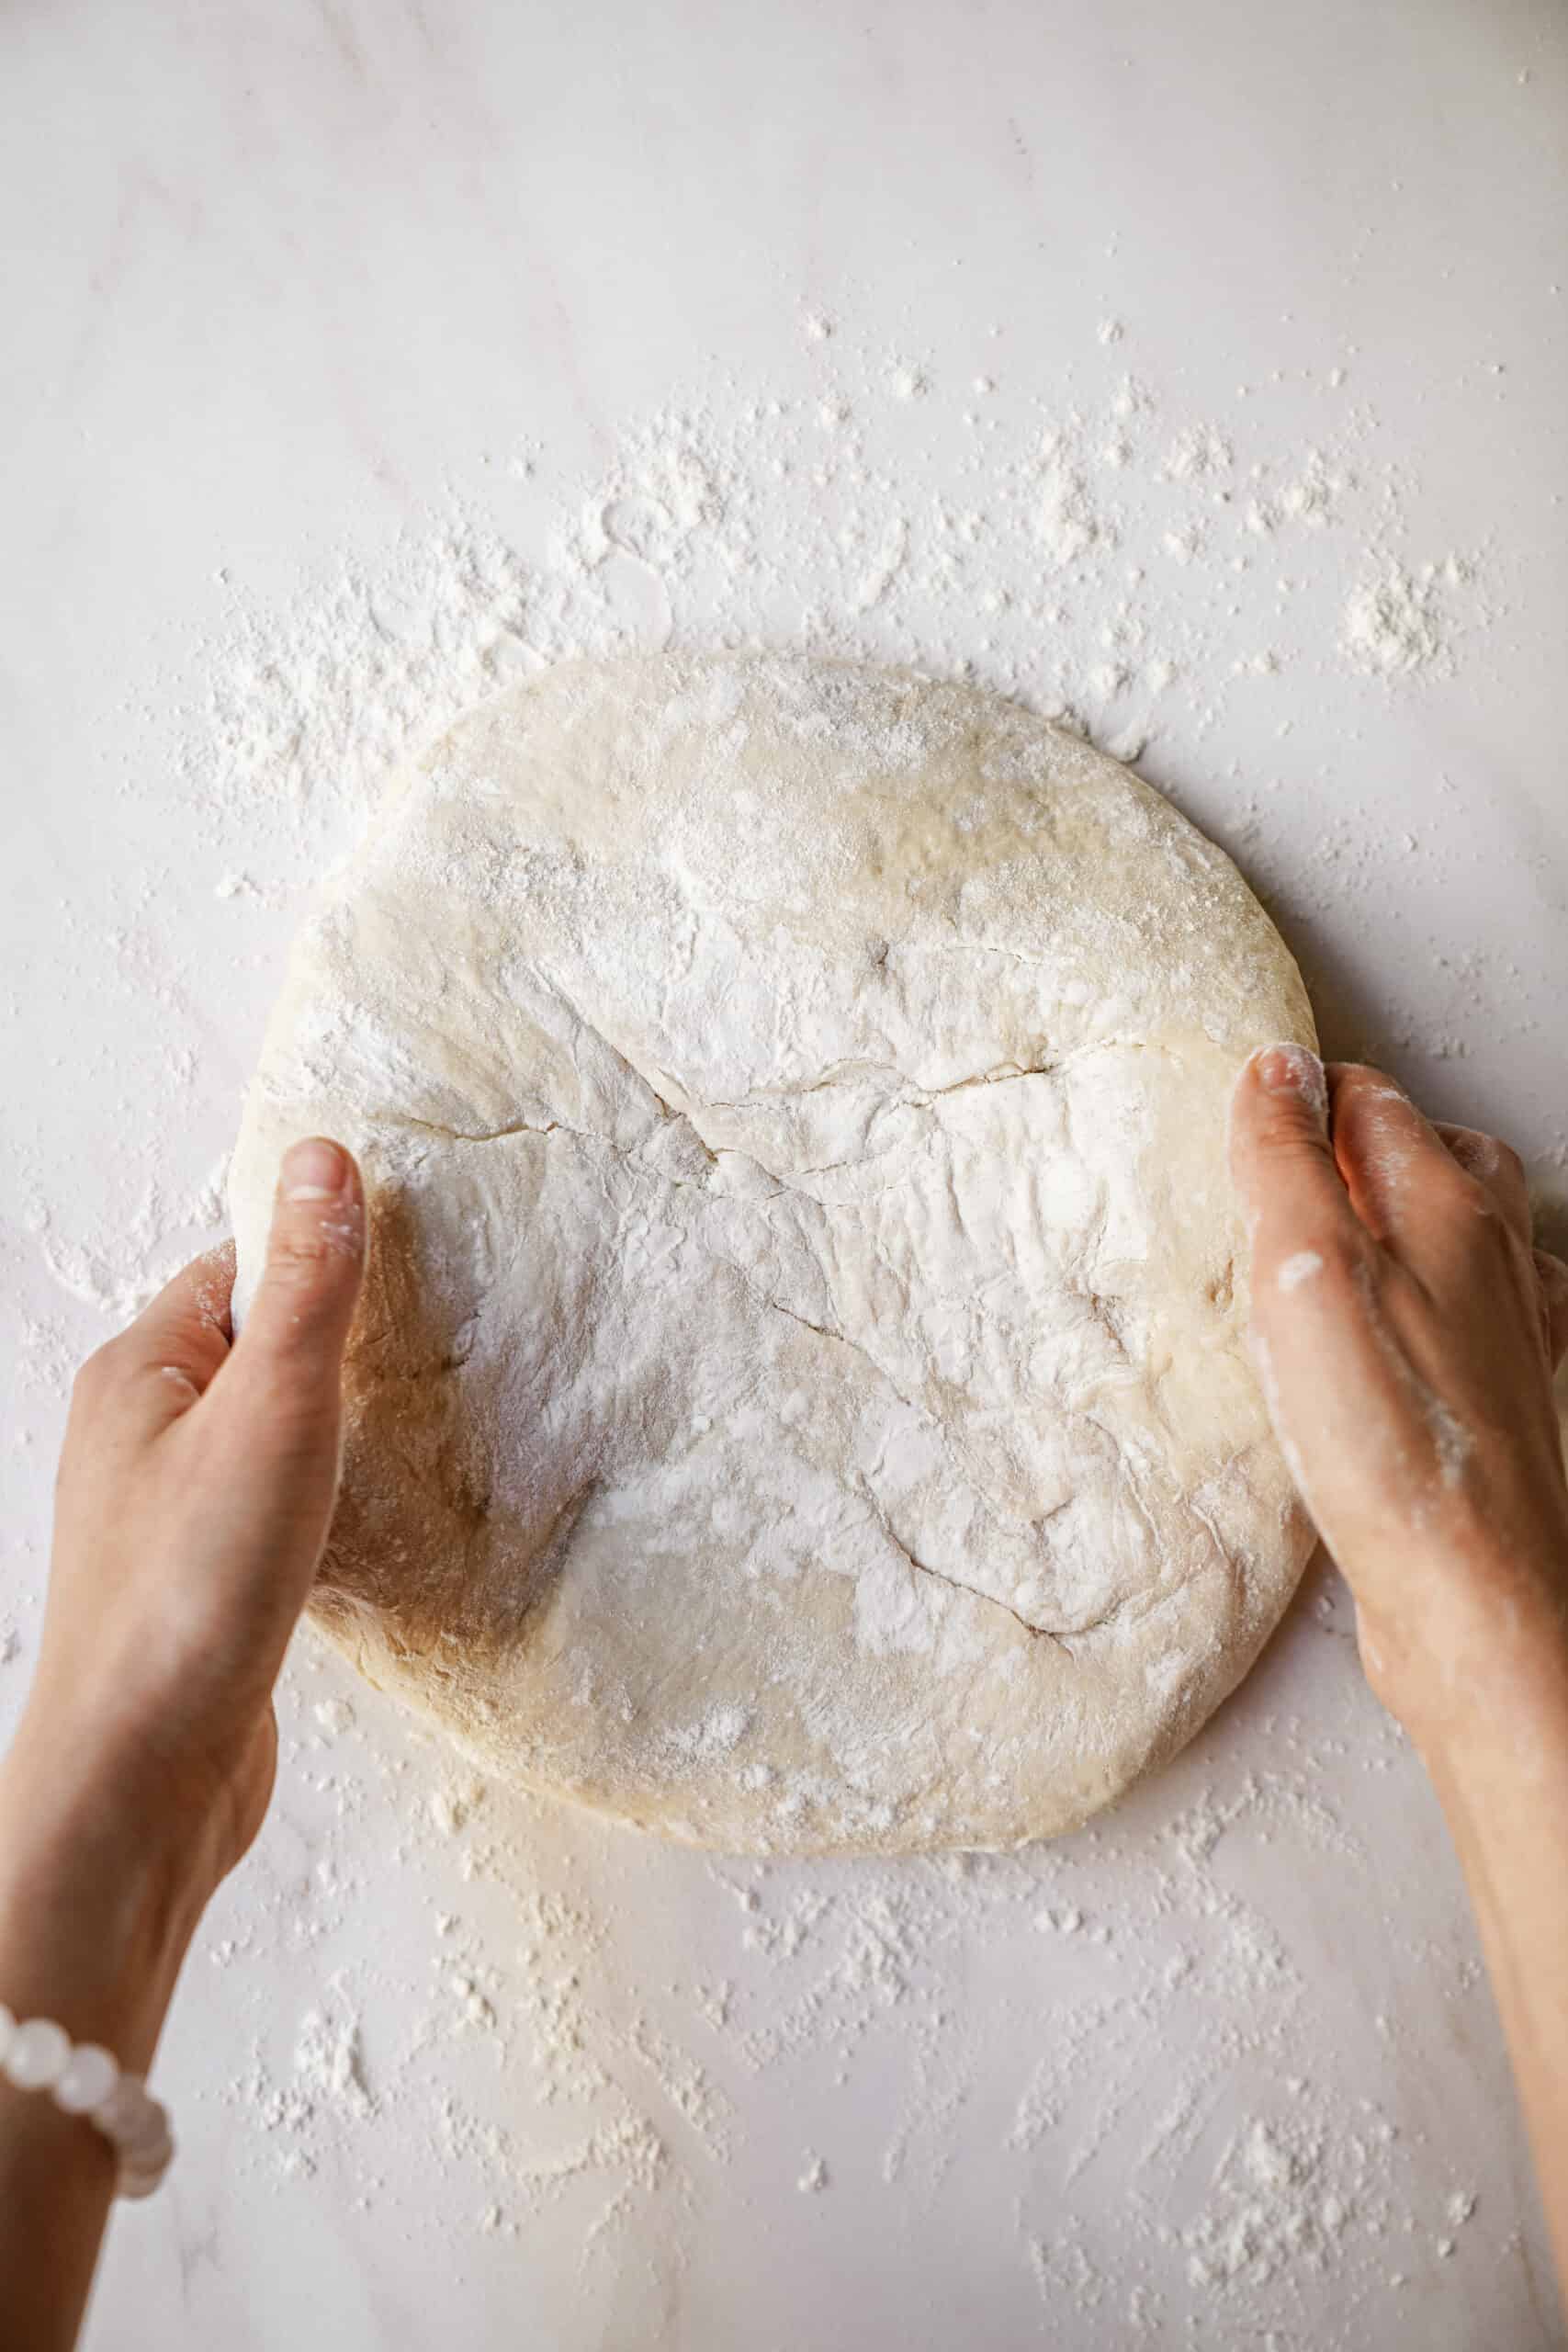 Dough rolled out with flour on counter